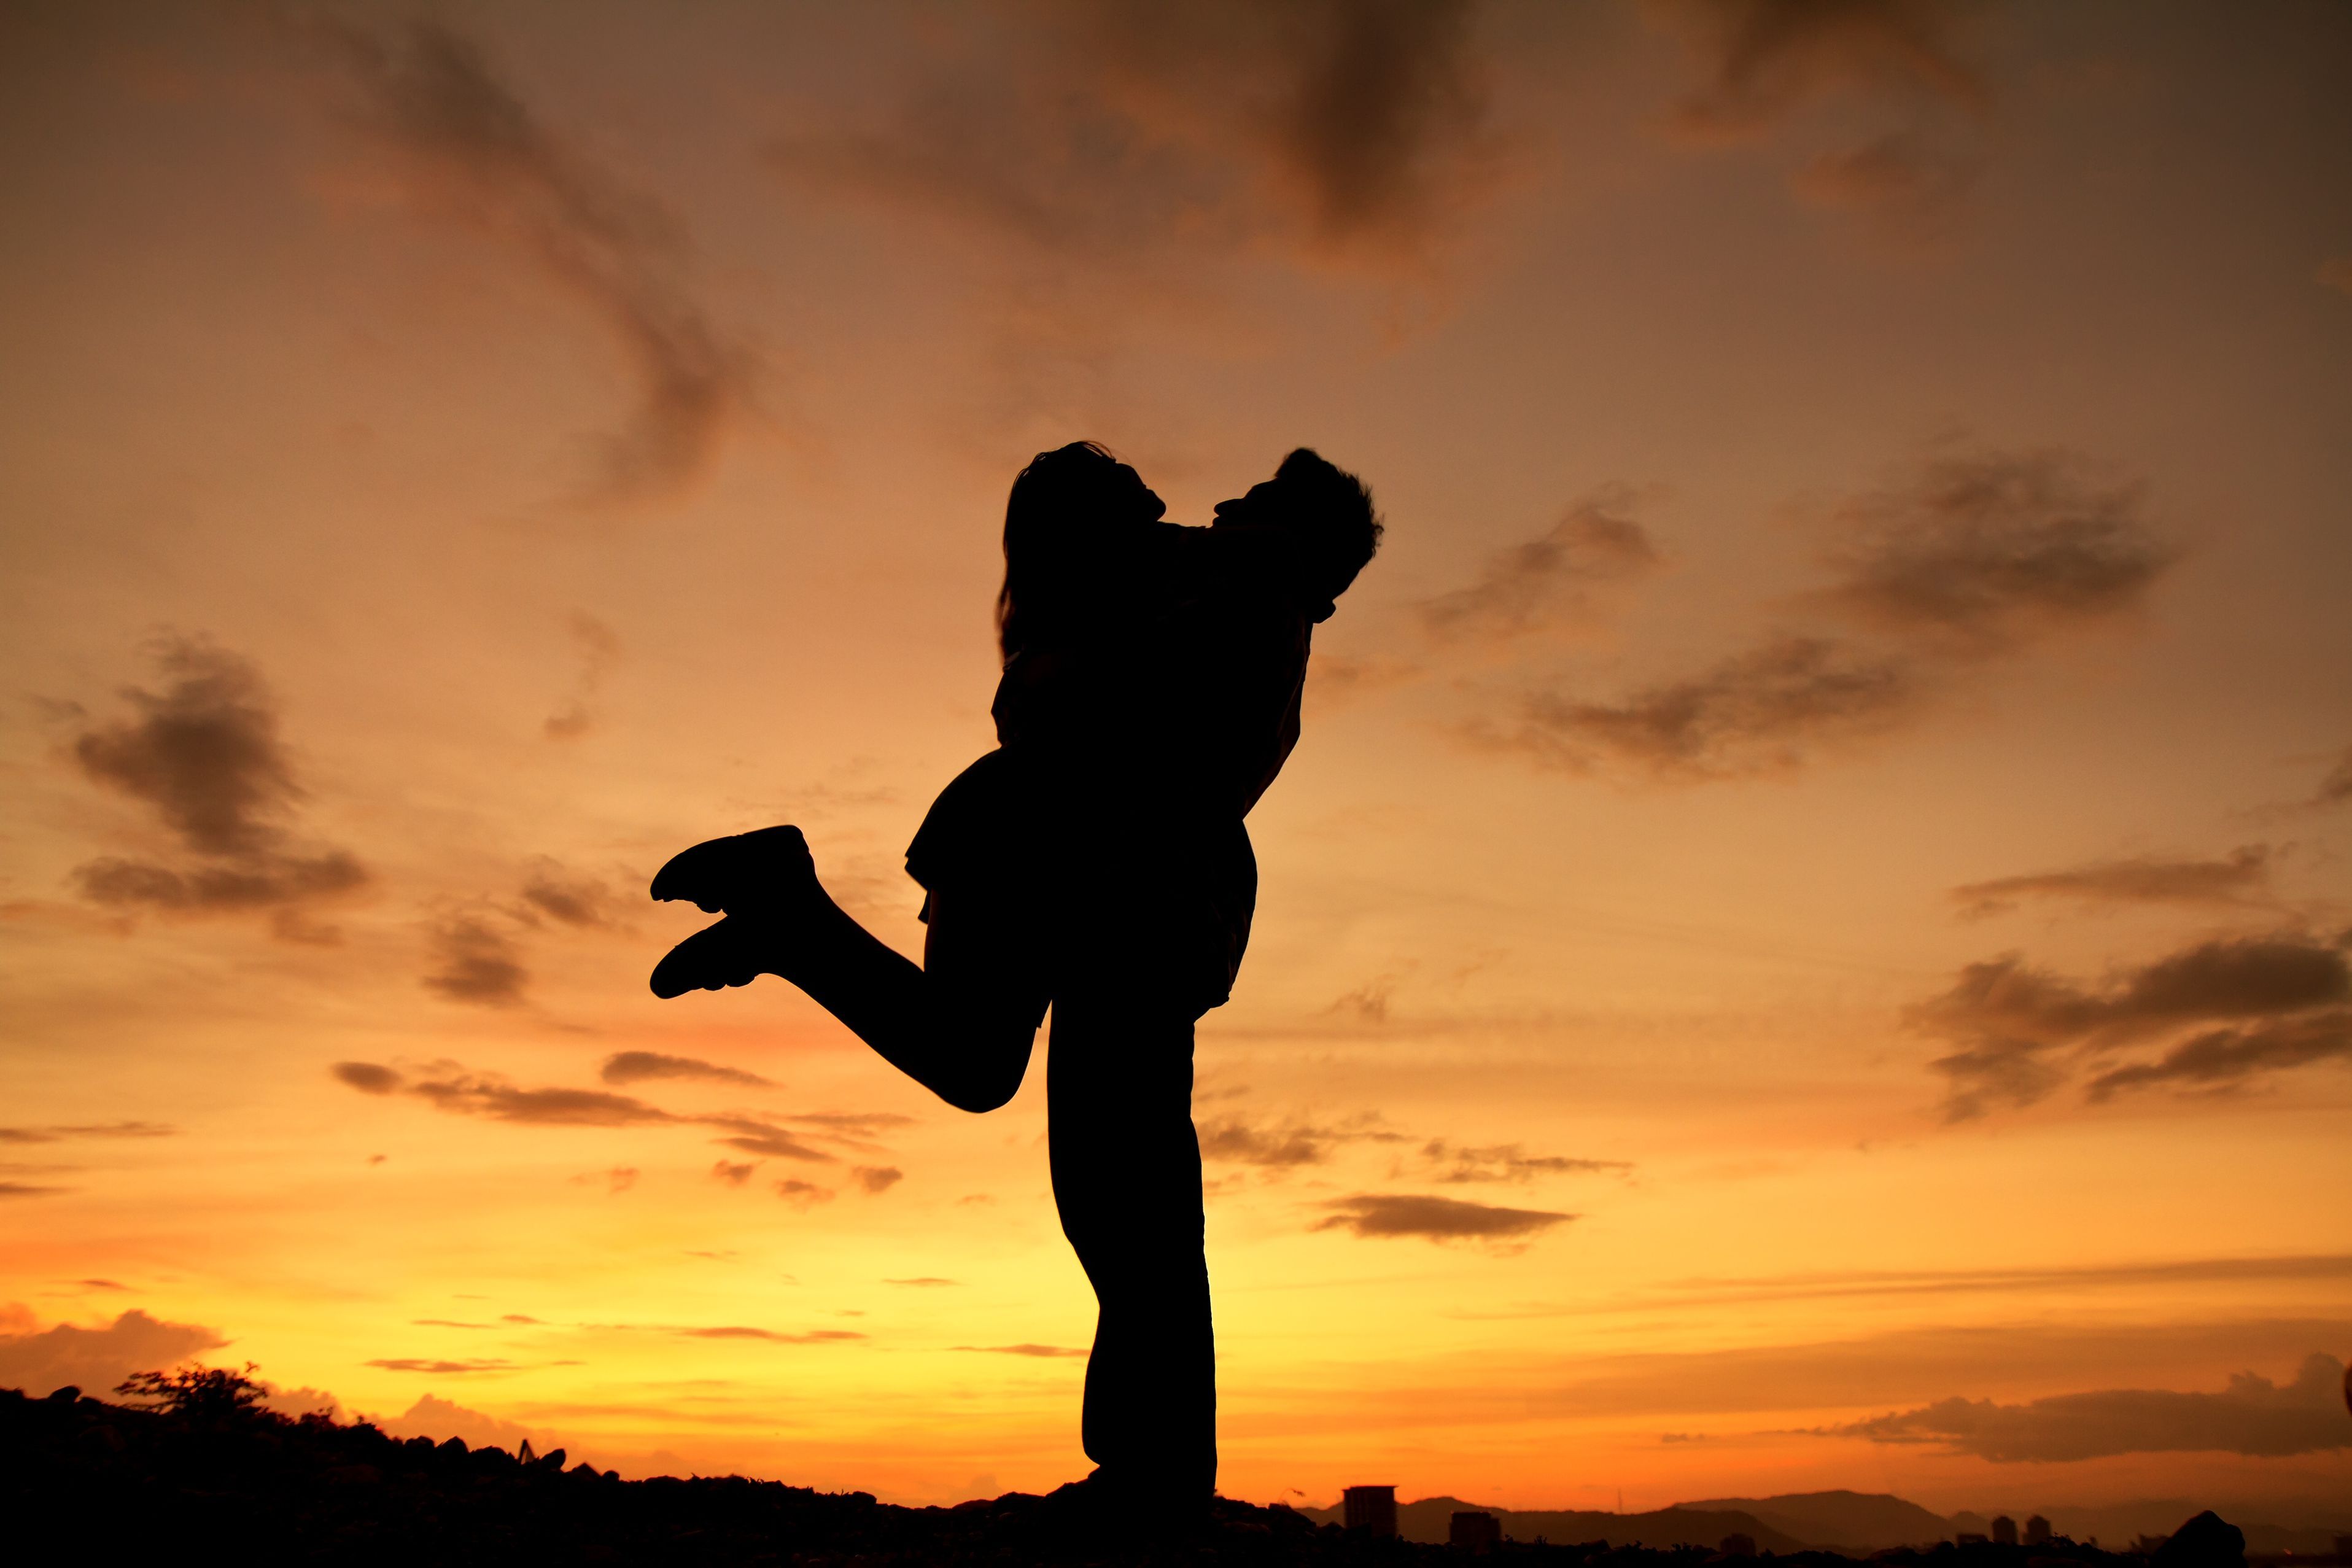 live wallpaper love couple,people in nature,sky,silhouette,sunset,cloud